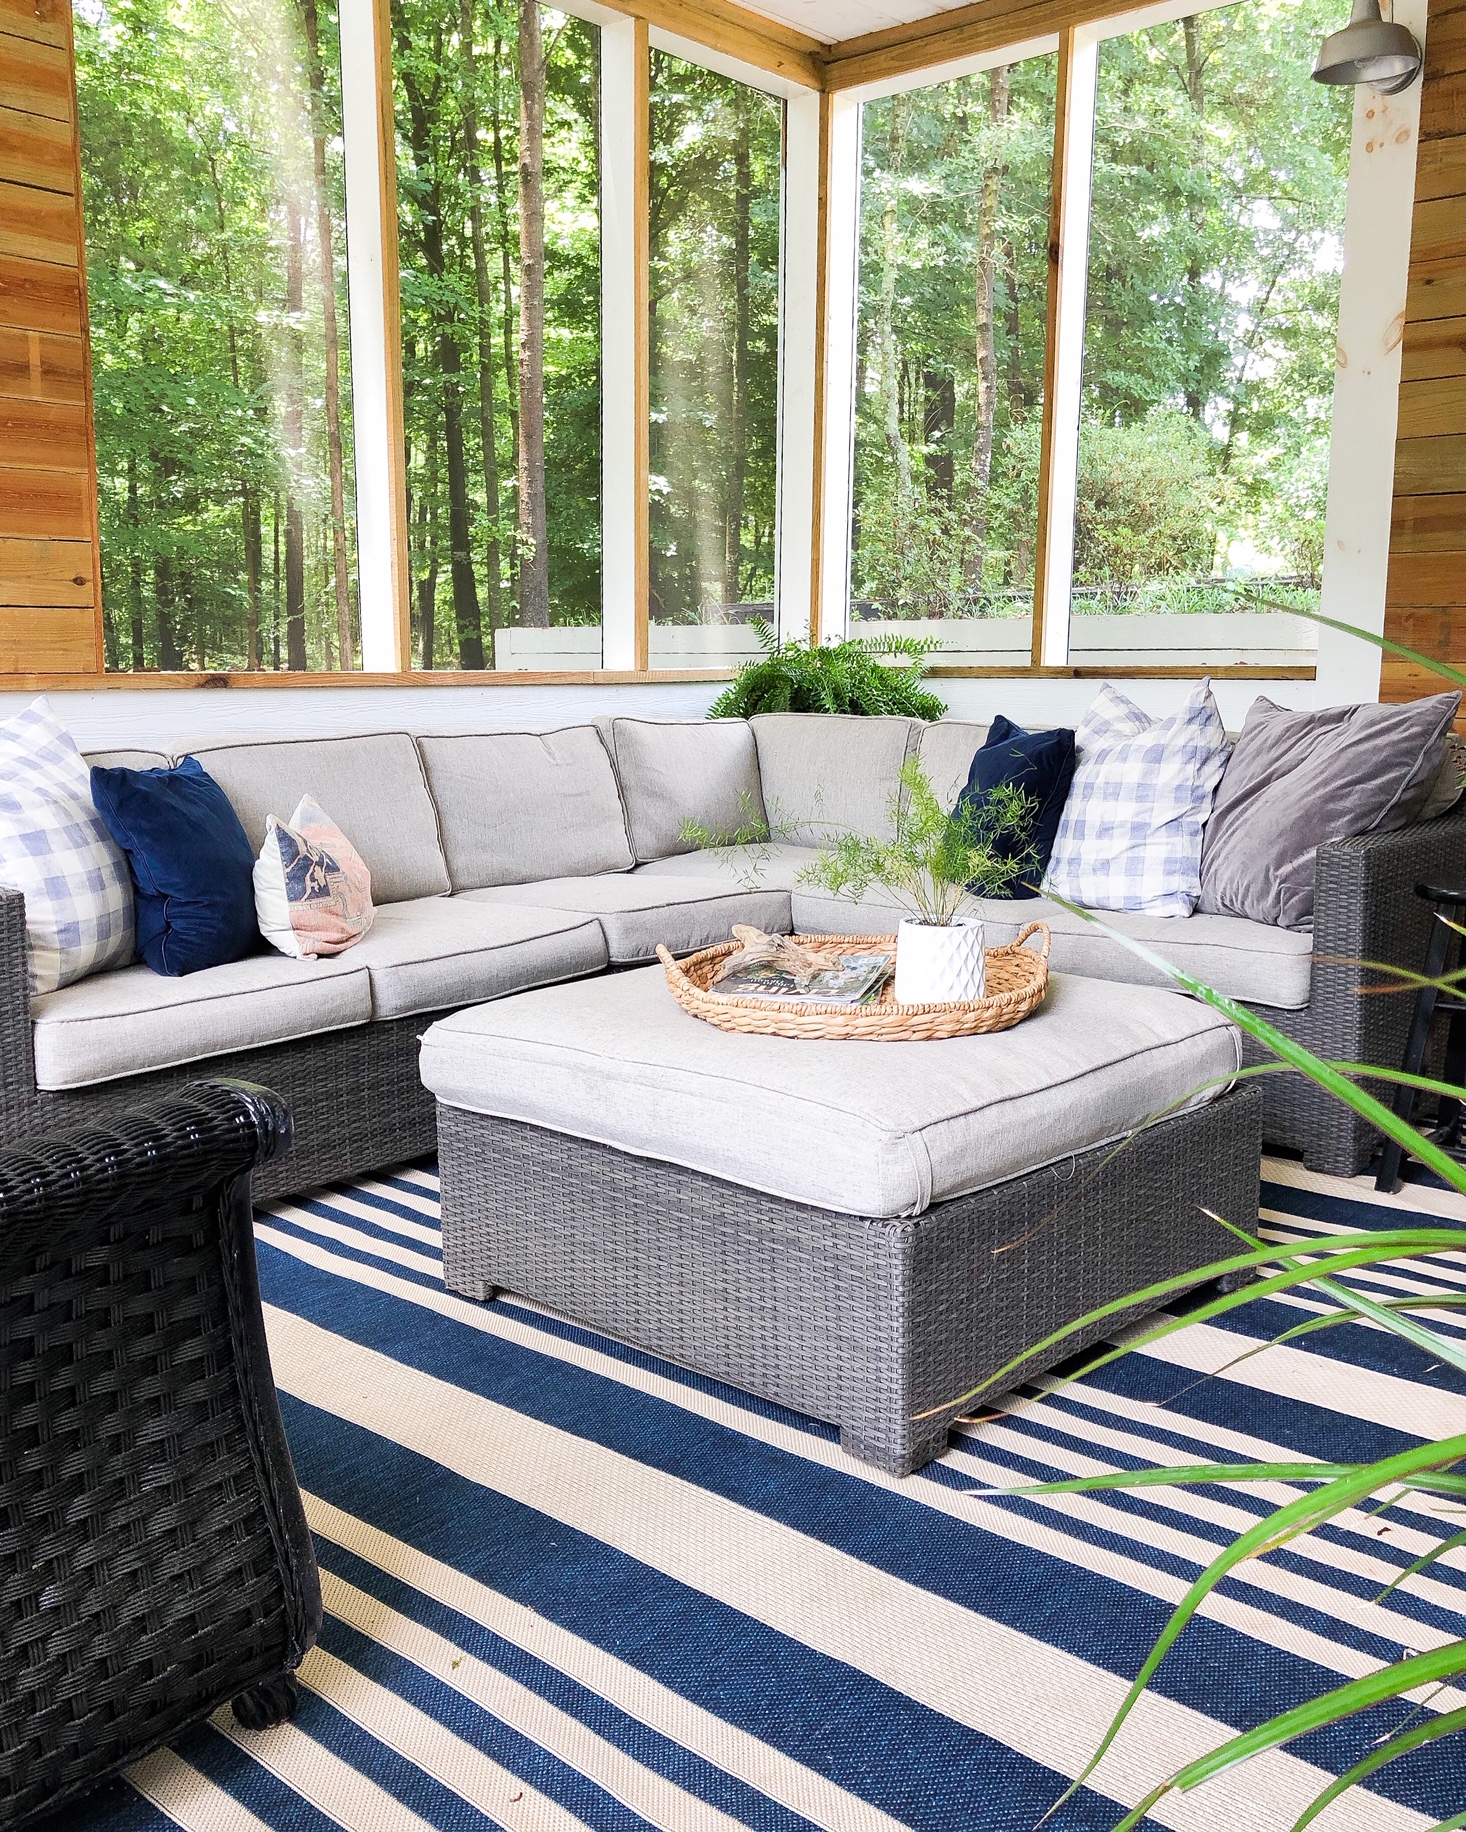 Keep It Simple Summer Home Tour 2019